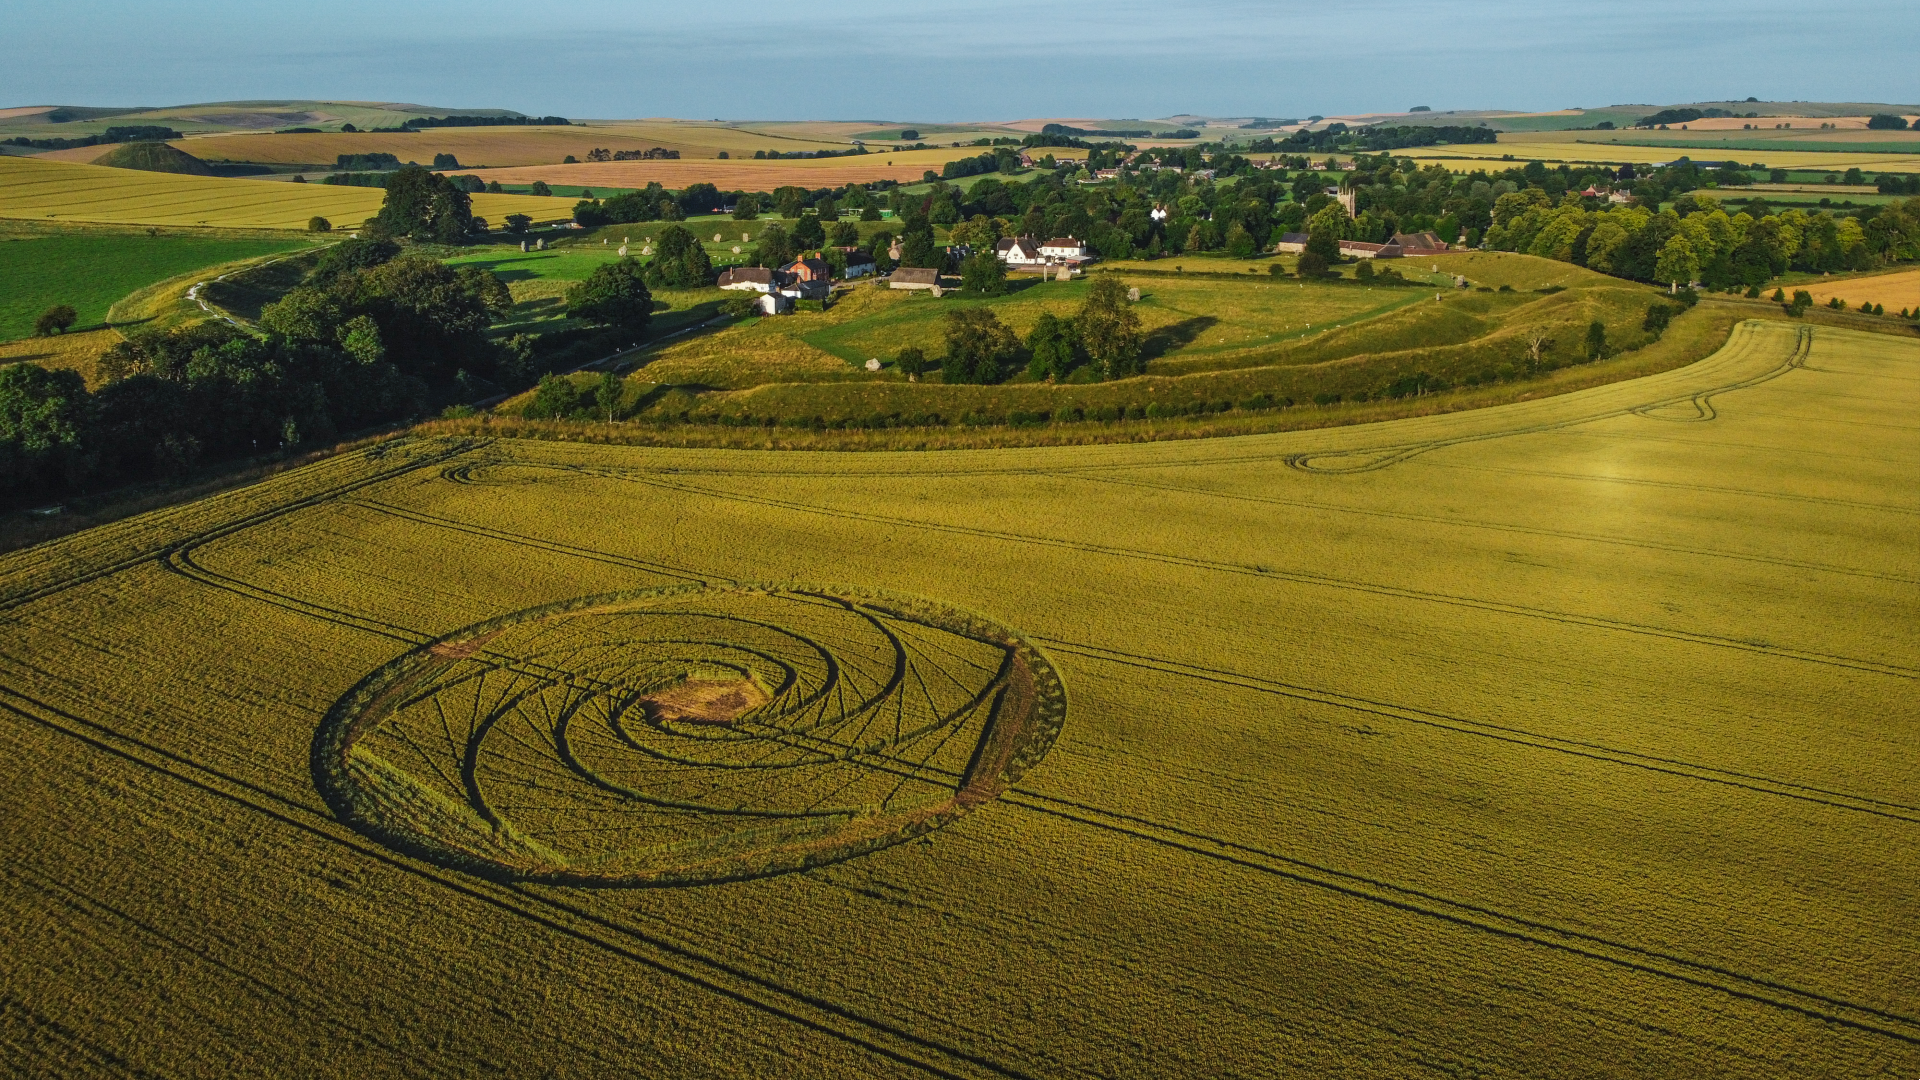 Crop circles: Myth, mystery and history | Live Science